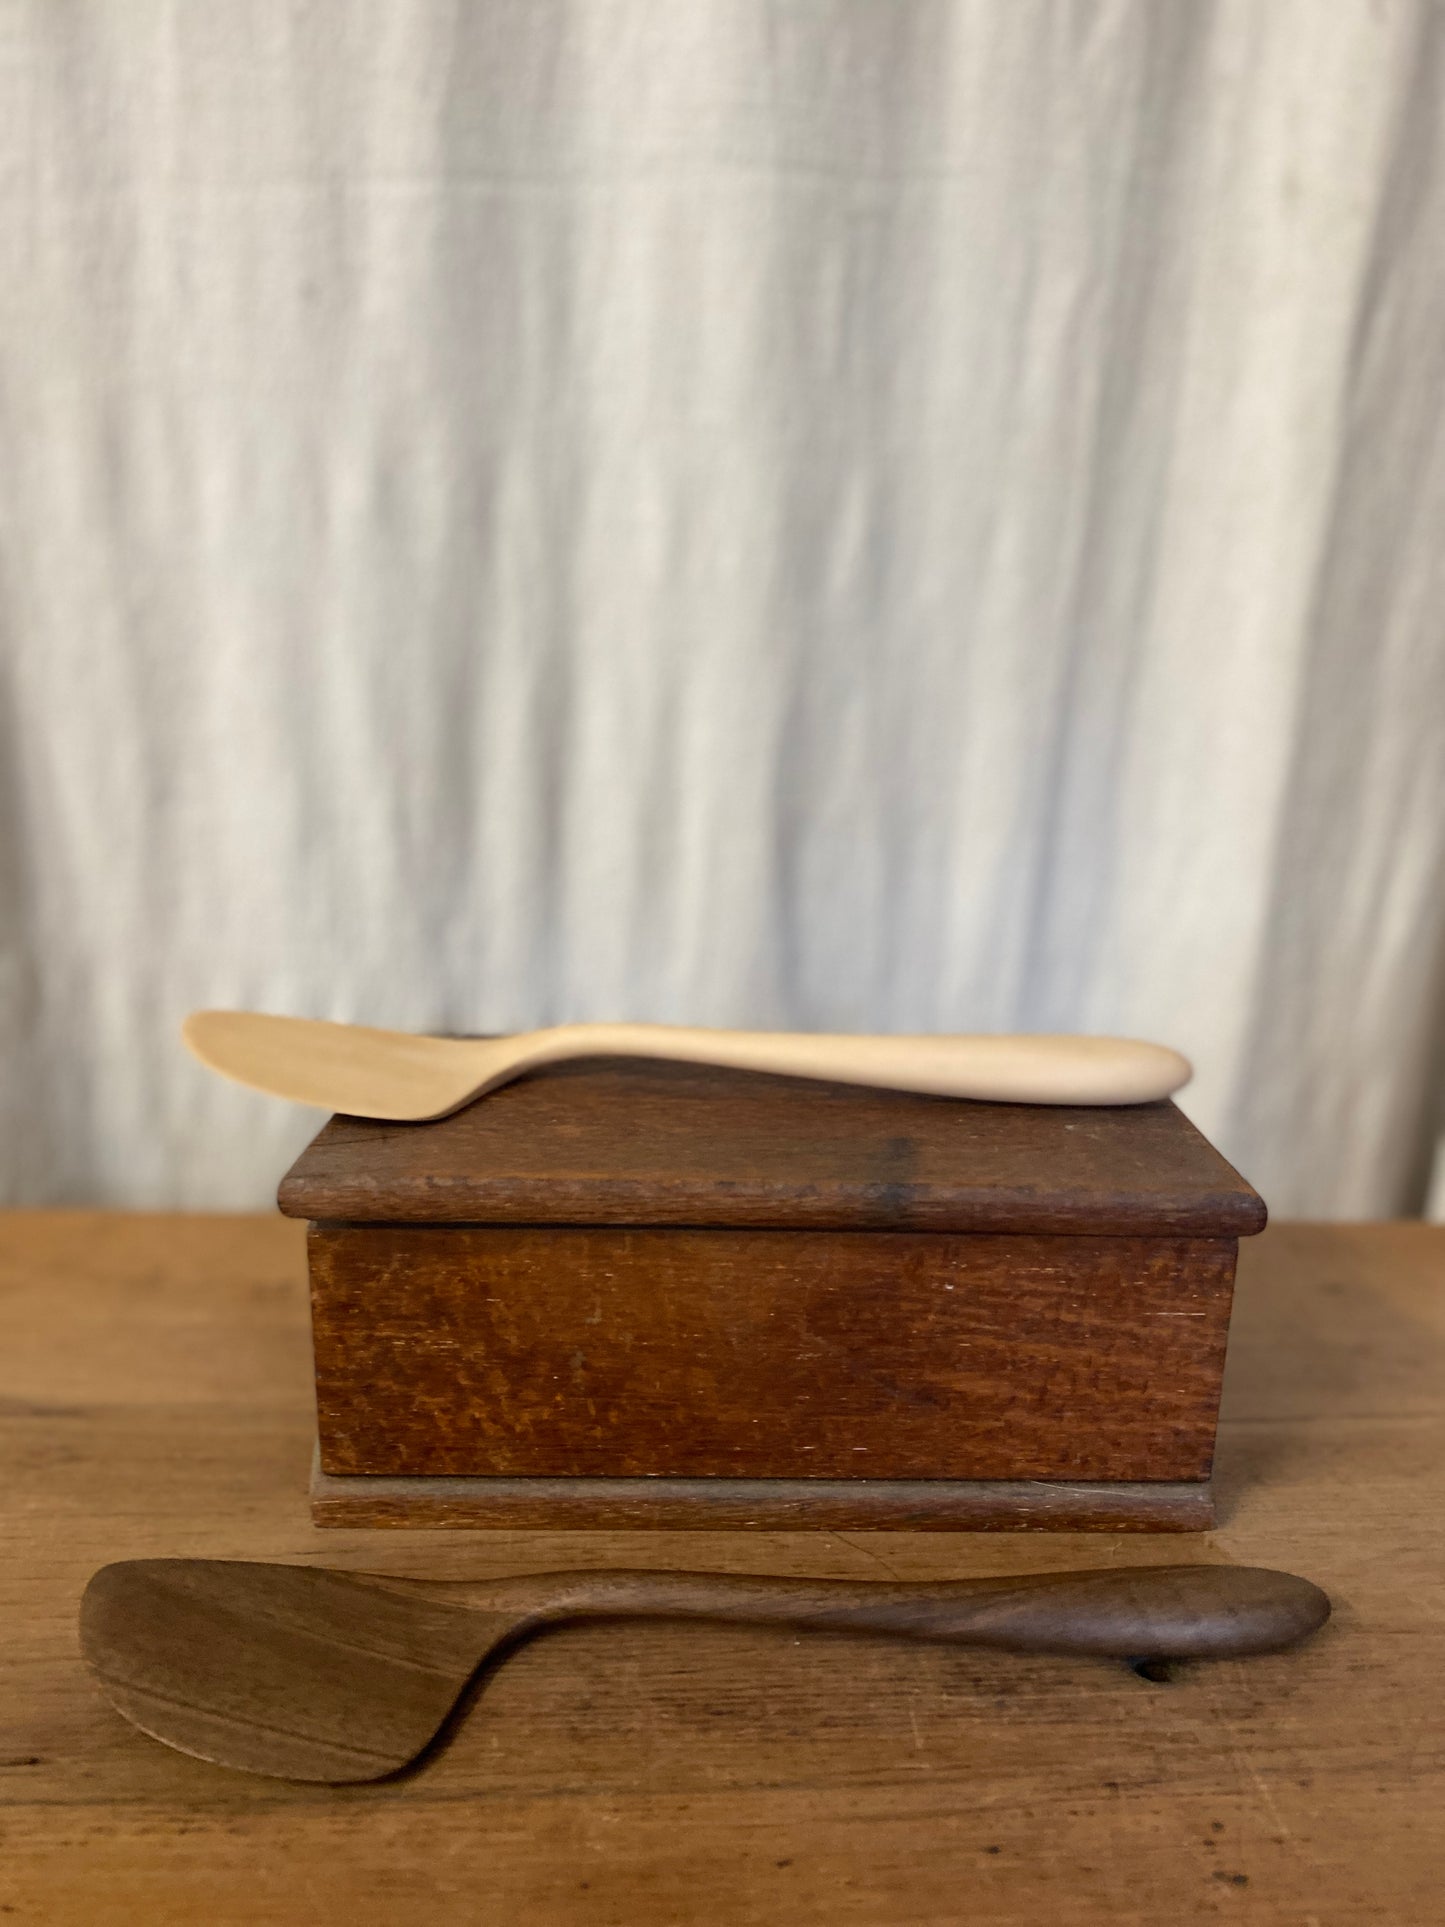 Hand Carved Wooden Wok Spatula